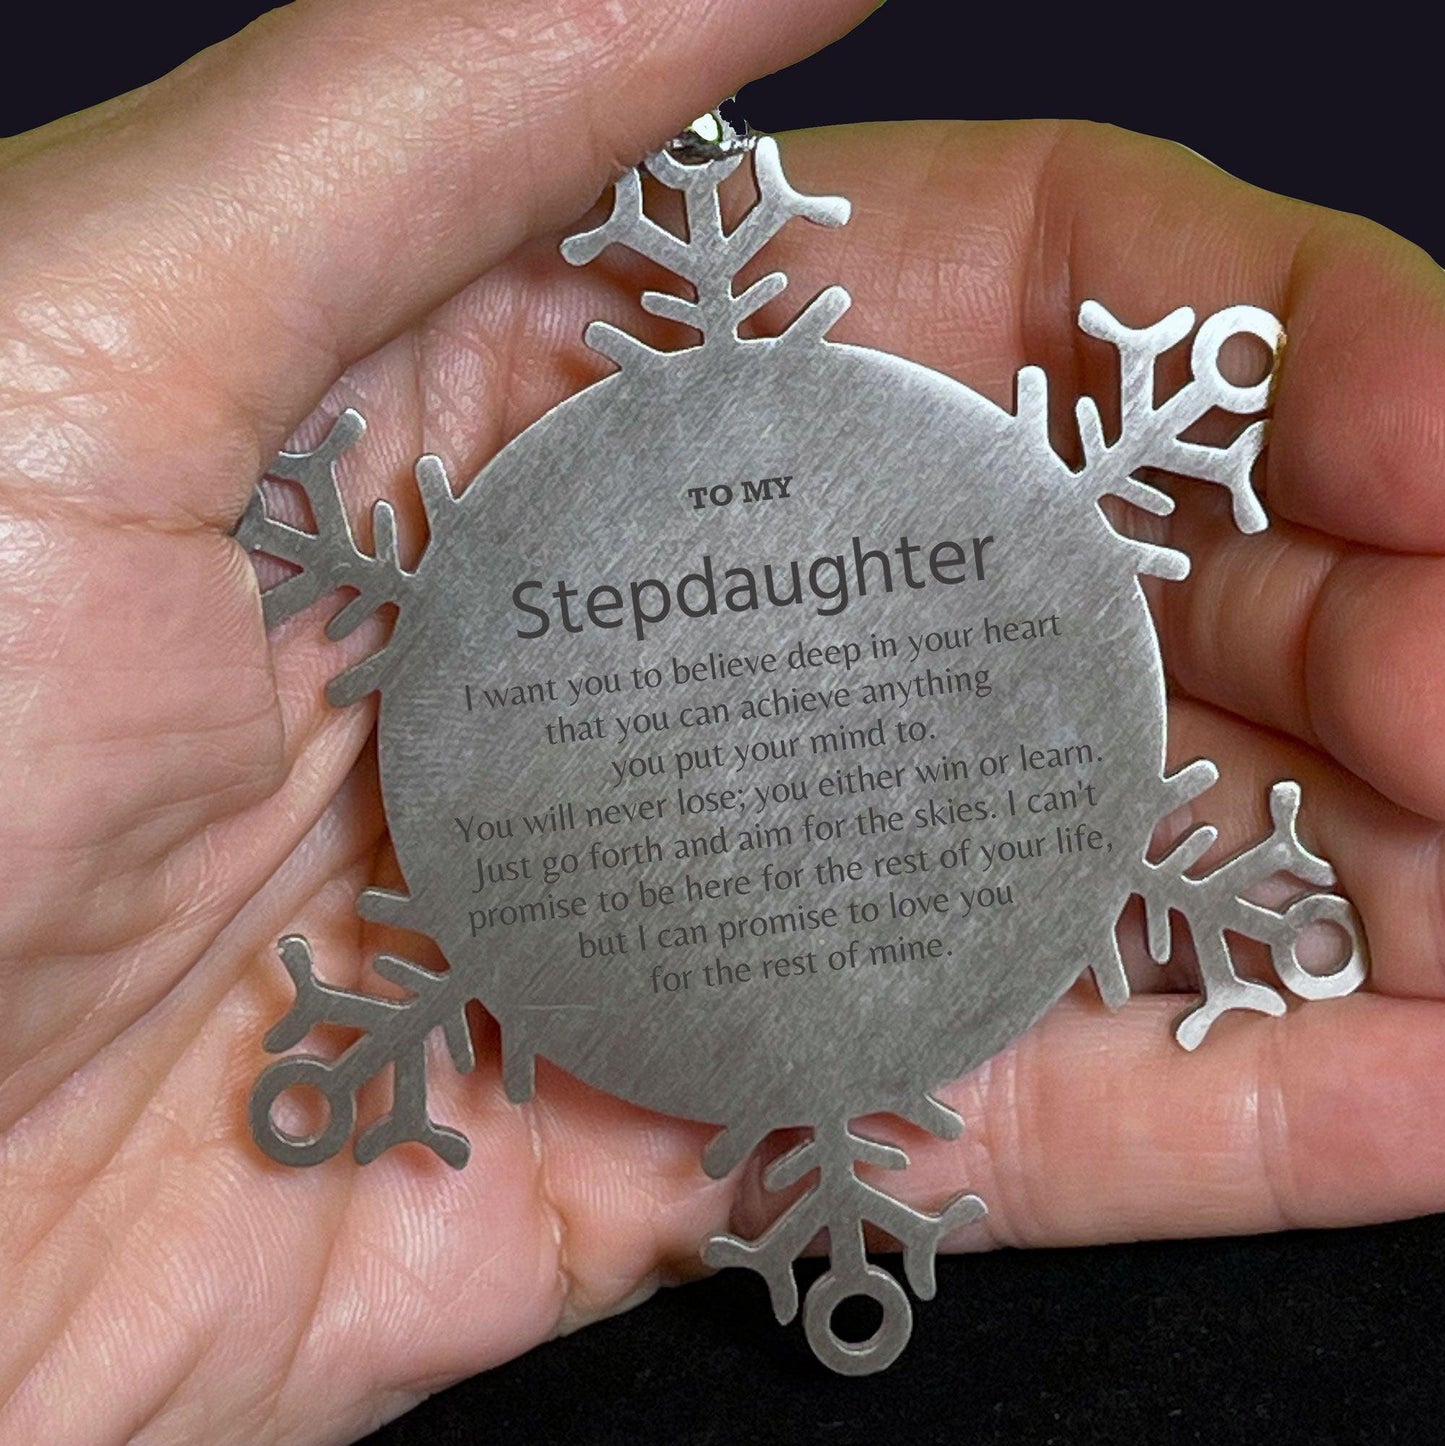 Motivational Stepdaughter Snowflake Ornament, Stepdaughter I can promise to love you for the rest of mine, Christmas Birthday Gift - Mallard Moon Gift Shop